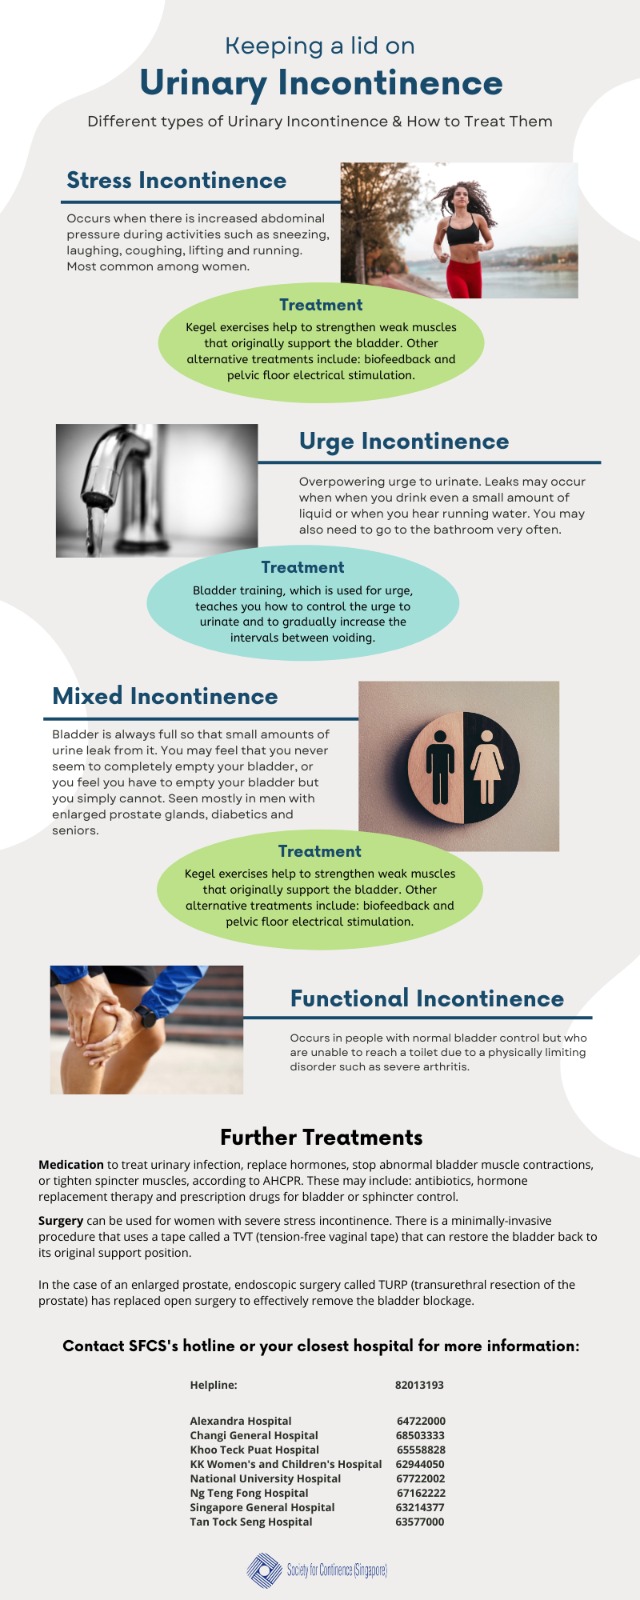 Urinary incontinence in pregnancy and how to tackle it